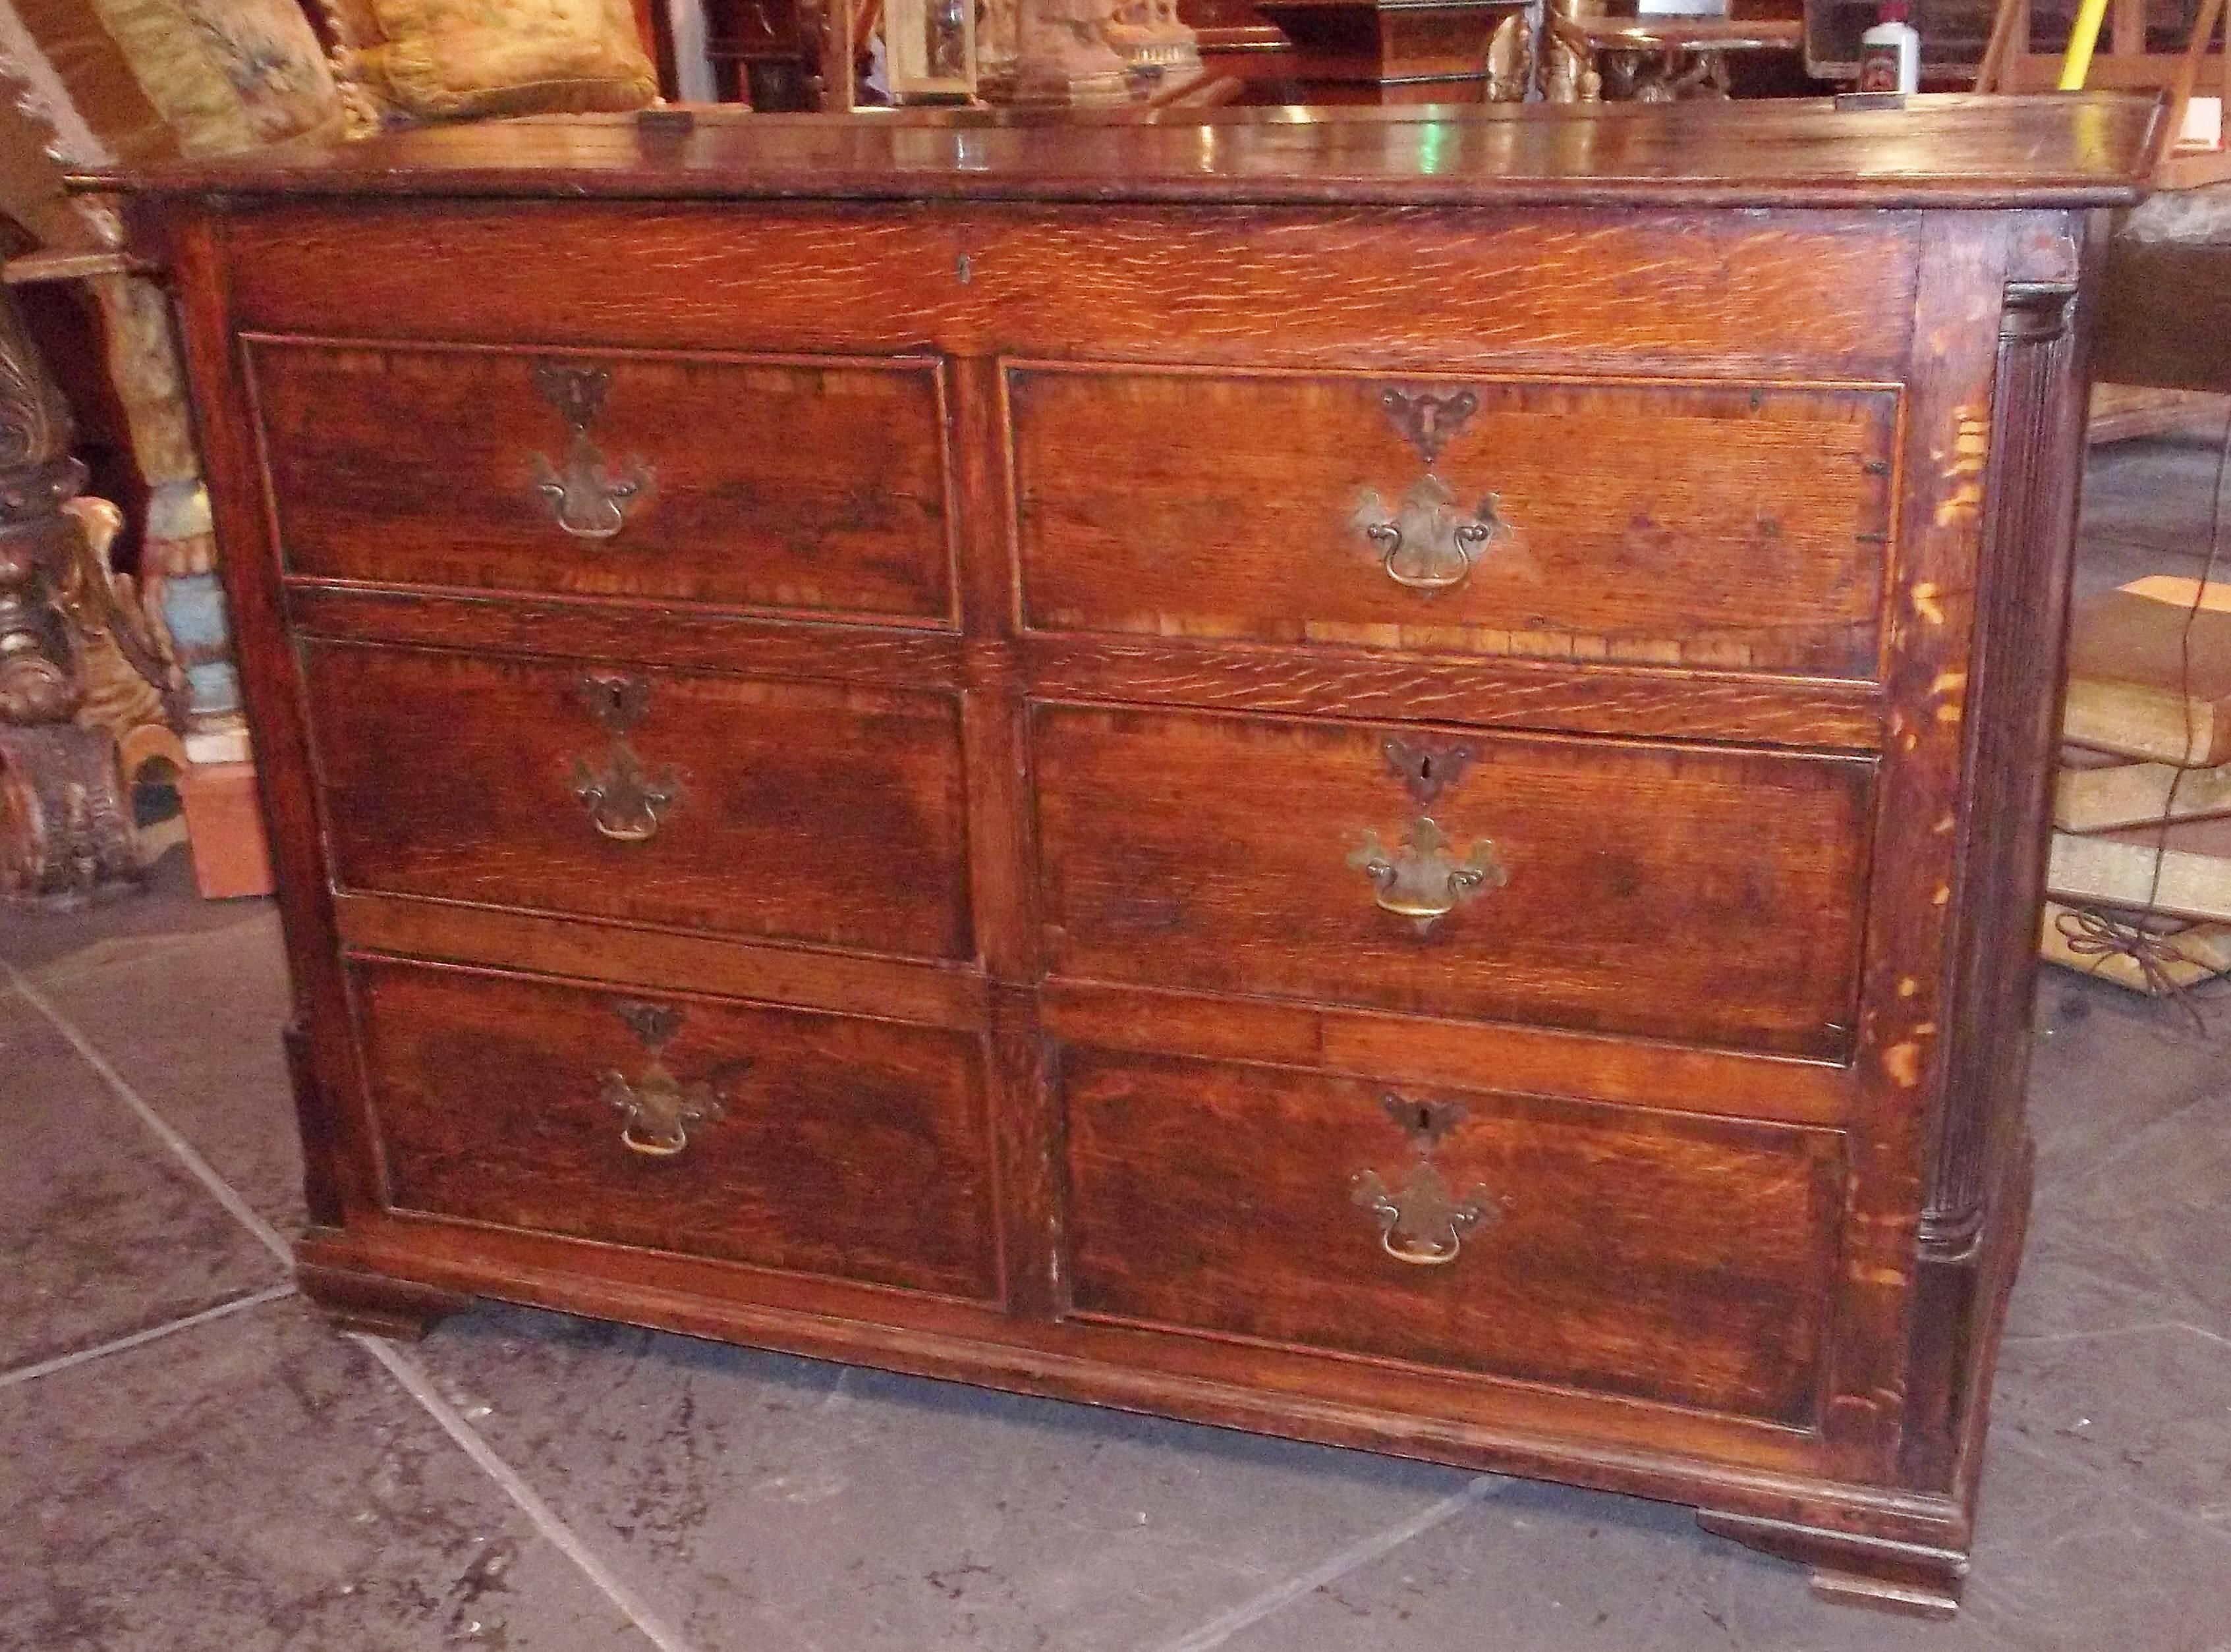 Around the top and around each drawer. The ends coffered and with fluted columnettes, the whole on bracket feet, George II, circa 1780. The drawers with hand cut dovetailing. The hardware antique but probably replacement. No key . Nice mellow color